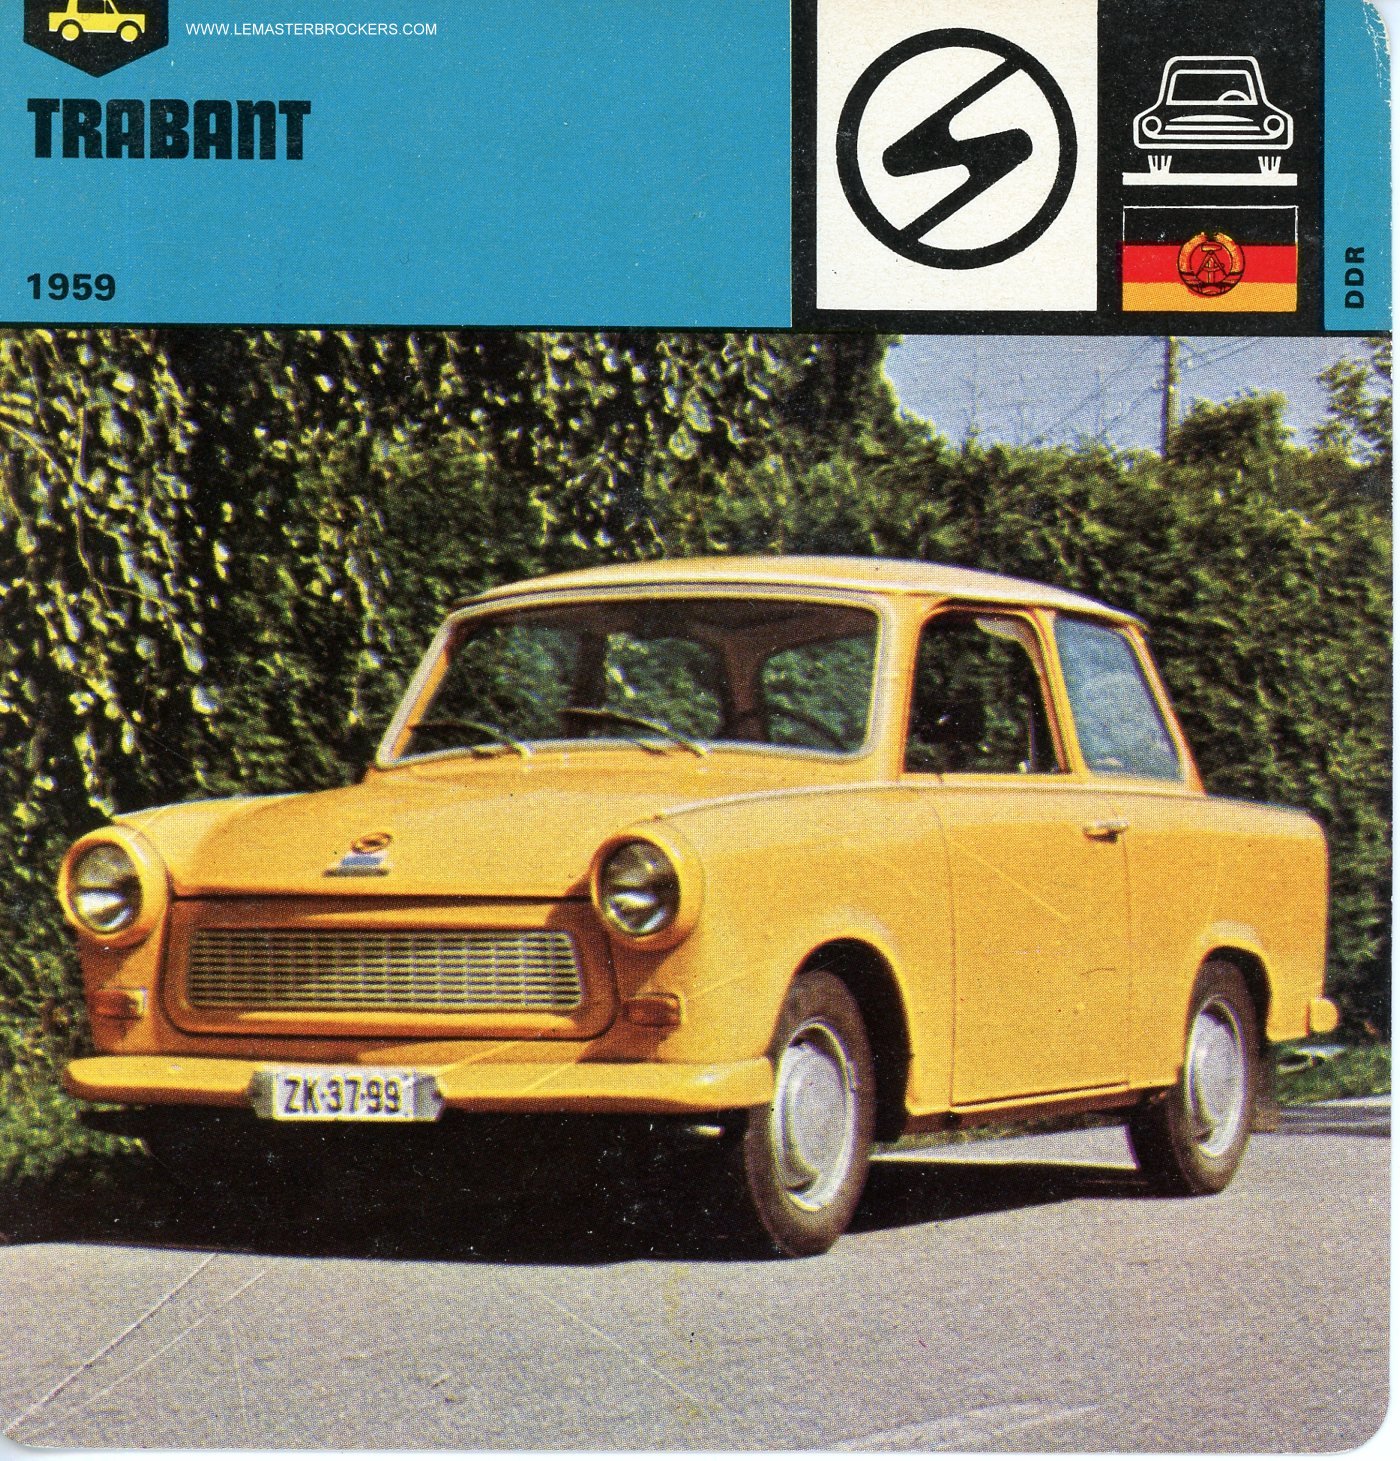 FICHE AUTO TRABANT-CARS-CARD-LEMASTERBROCKERS